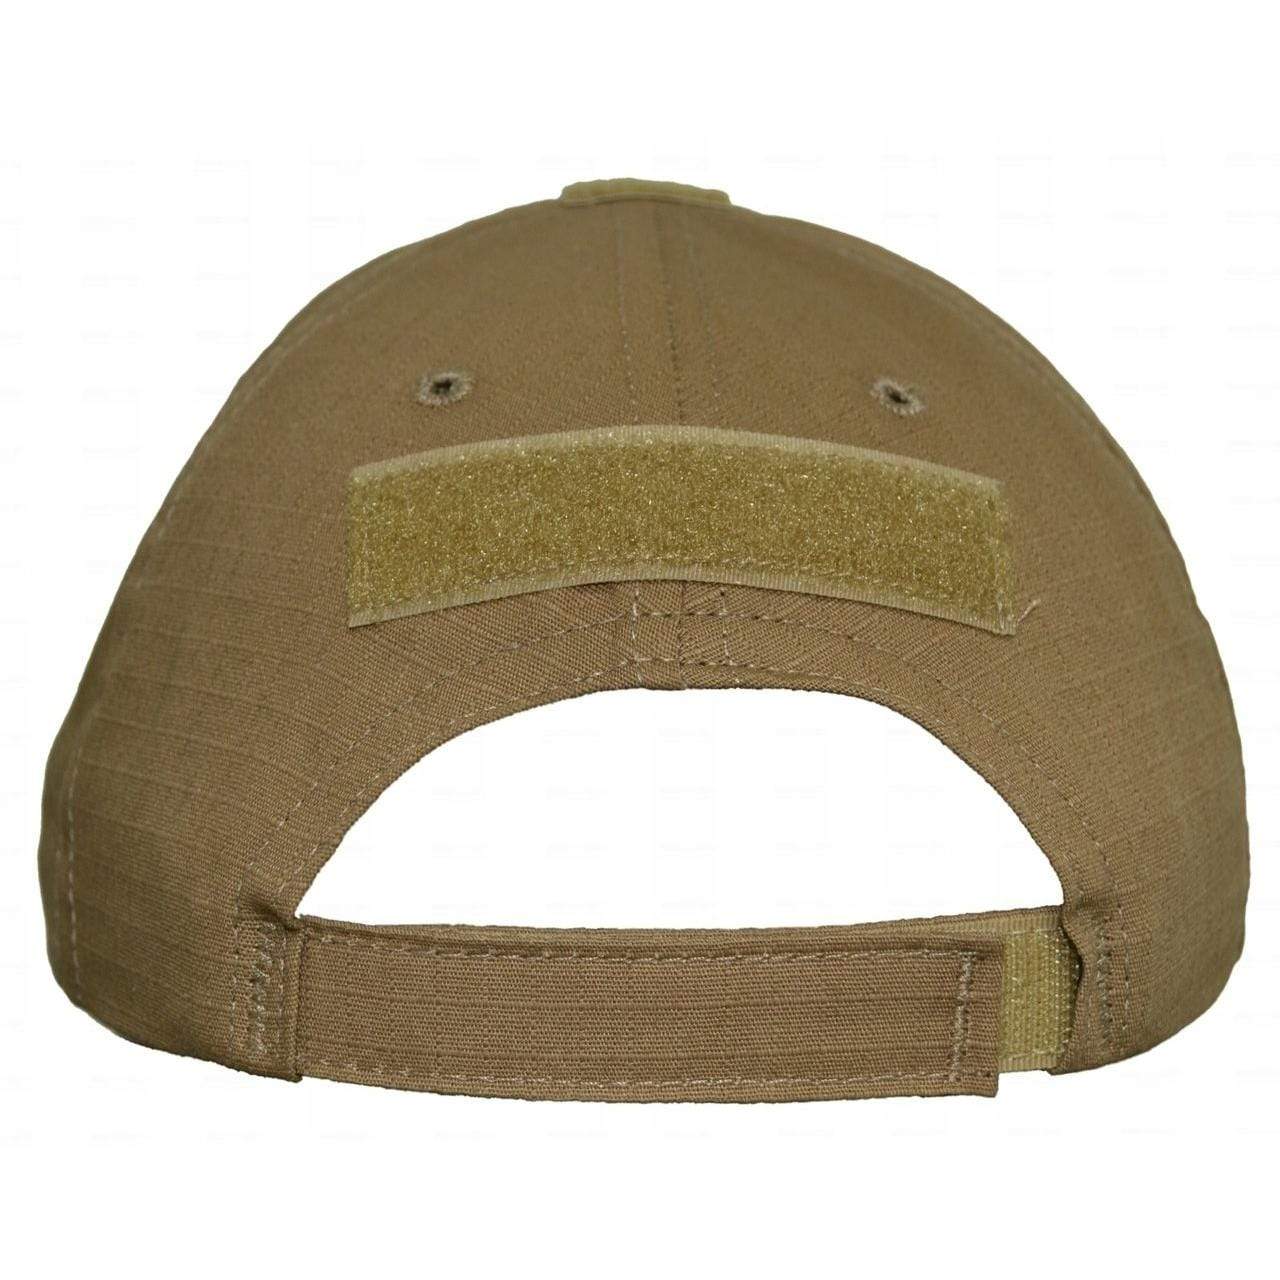 Tactical Gear Junkie Patches Tactical Gear Junkie American Made Tactical Operator Hat - with Custom 1x3.75 Patch